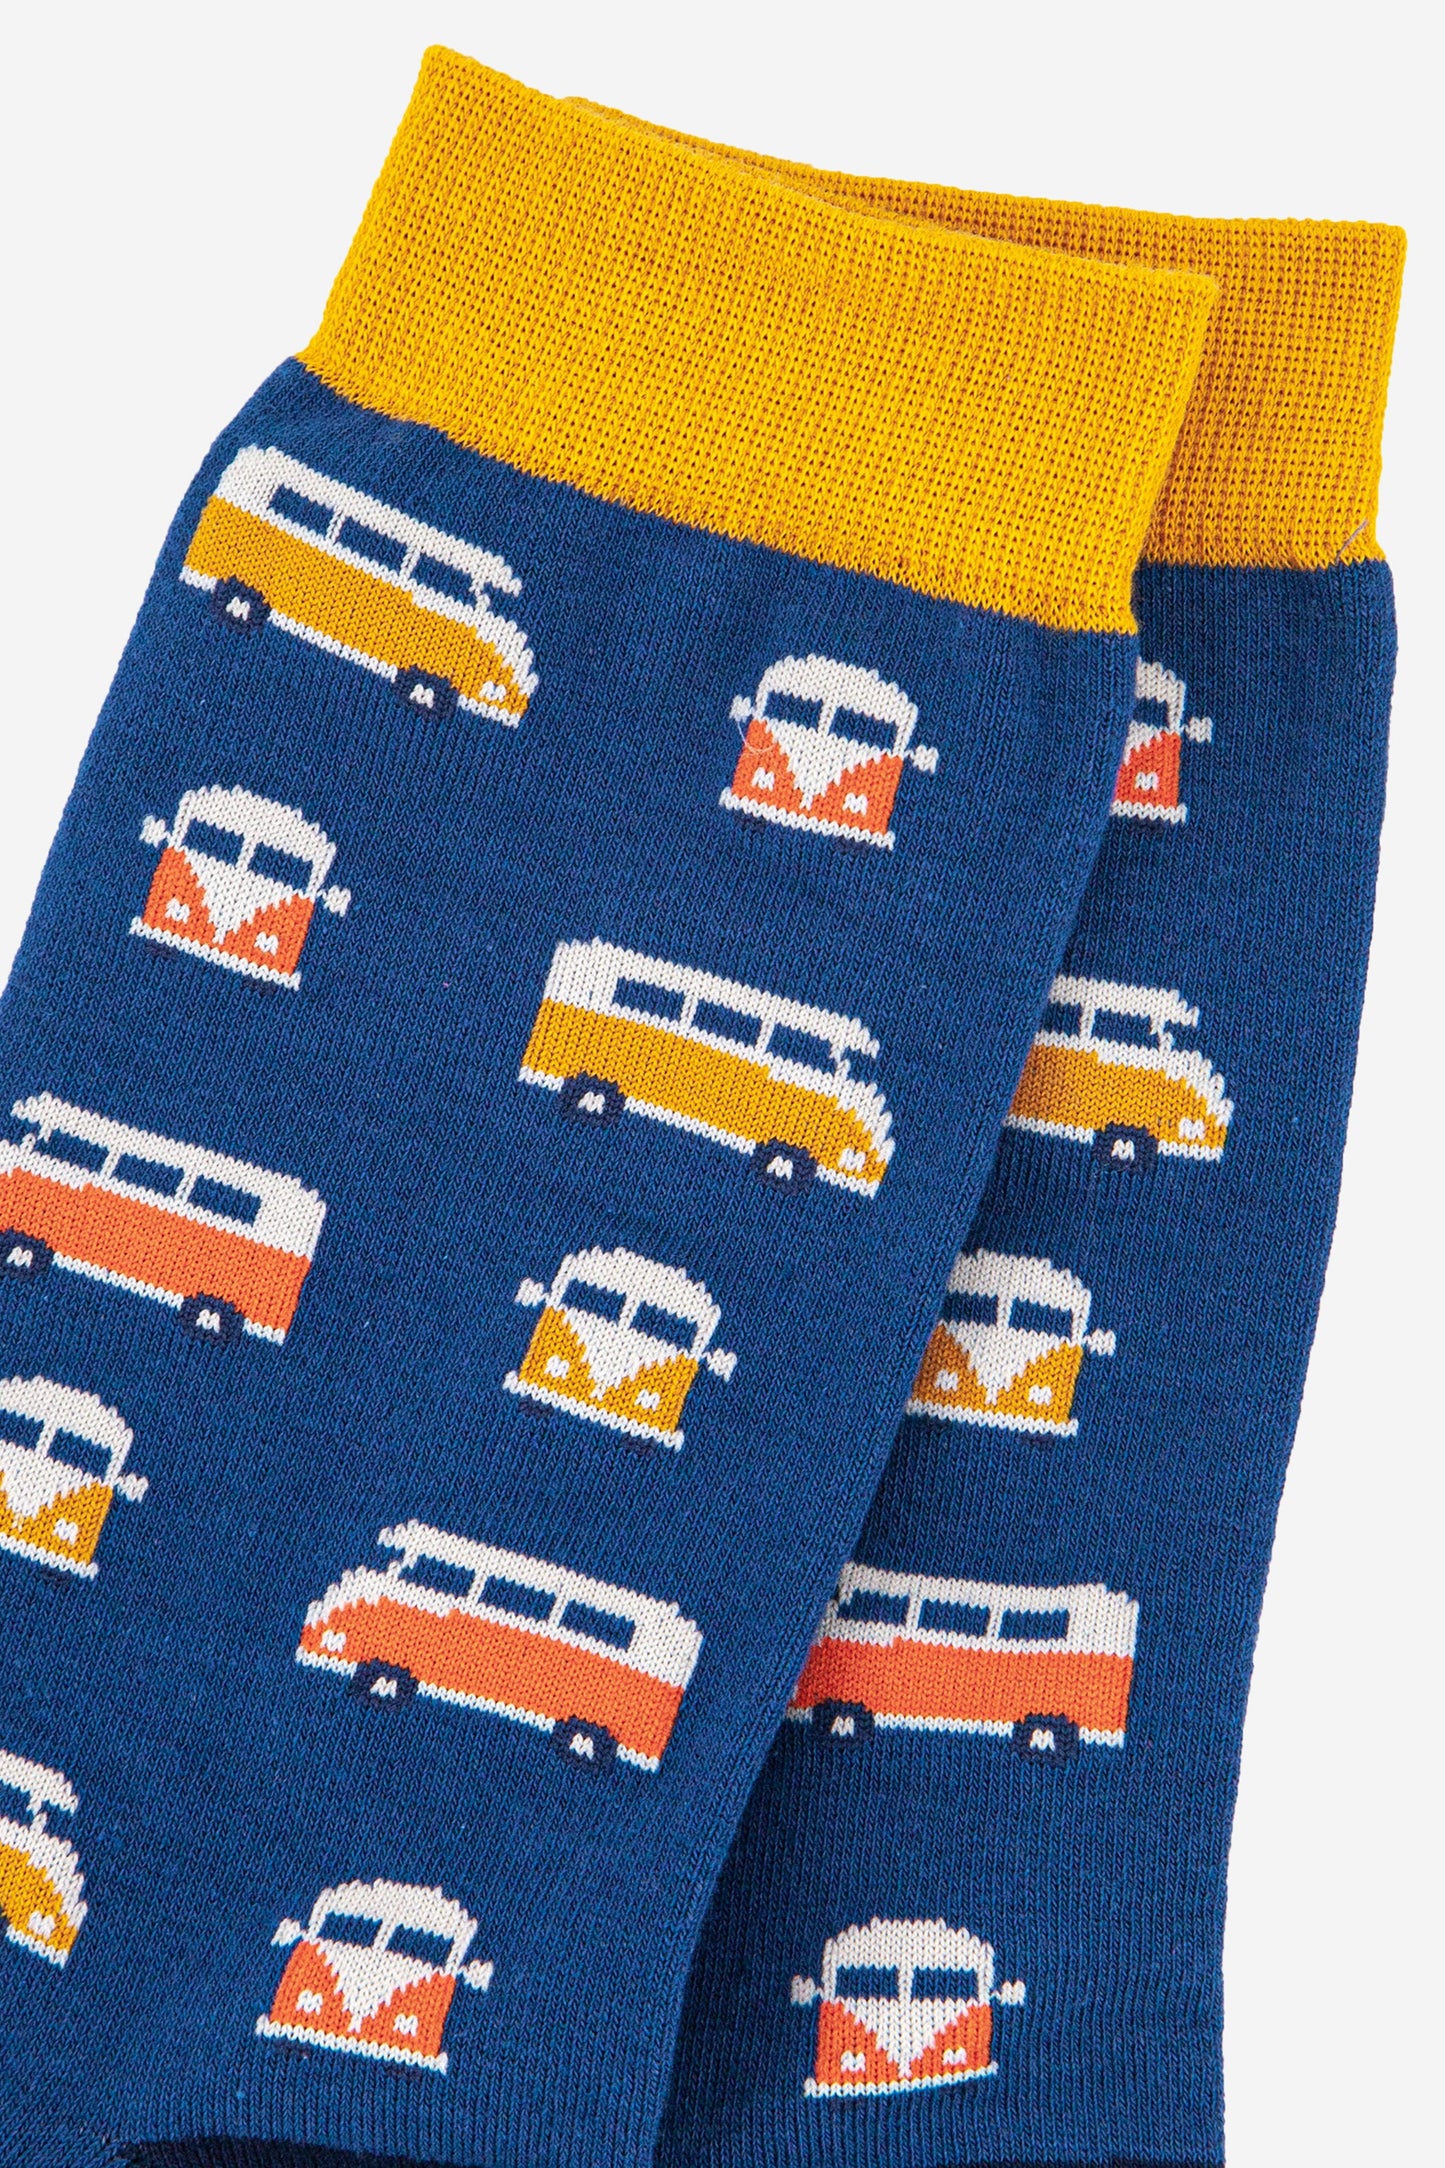 close up of the campervan pattern on the bamboo socks showing yellow and orange vintage style campevans